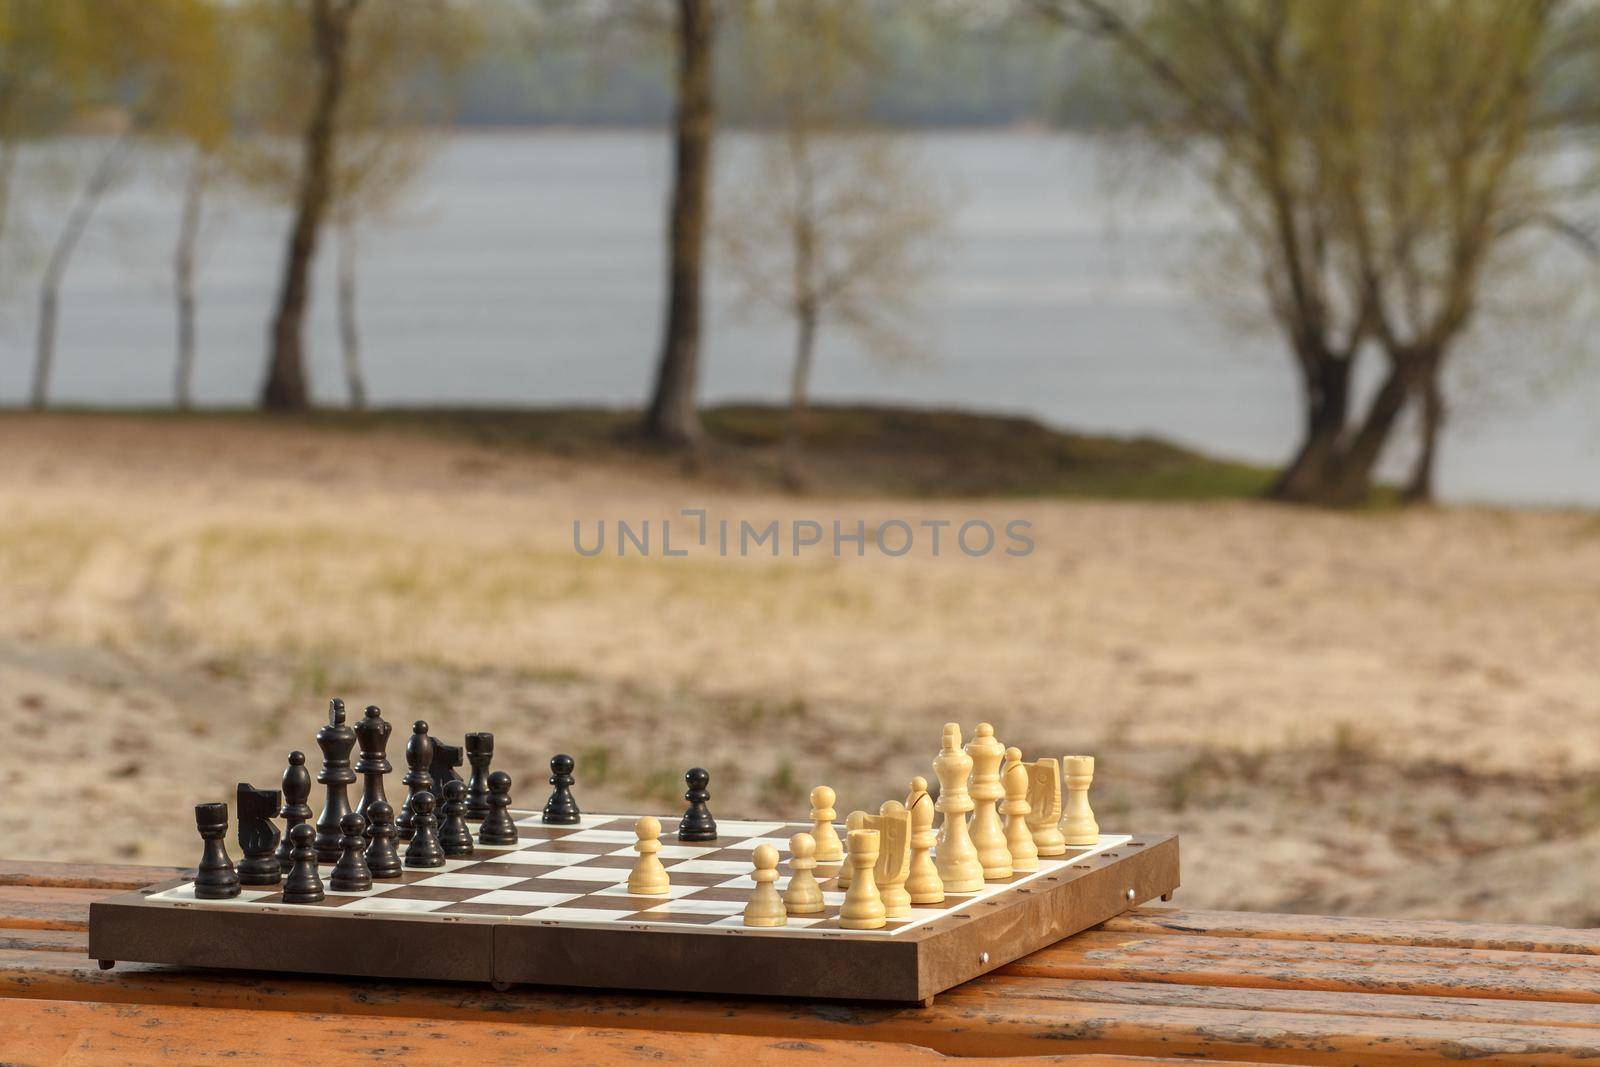 One chess pieces staying against black chess pieces Chess board with chess pieces on wooden bench with river embankment background